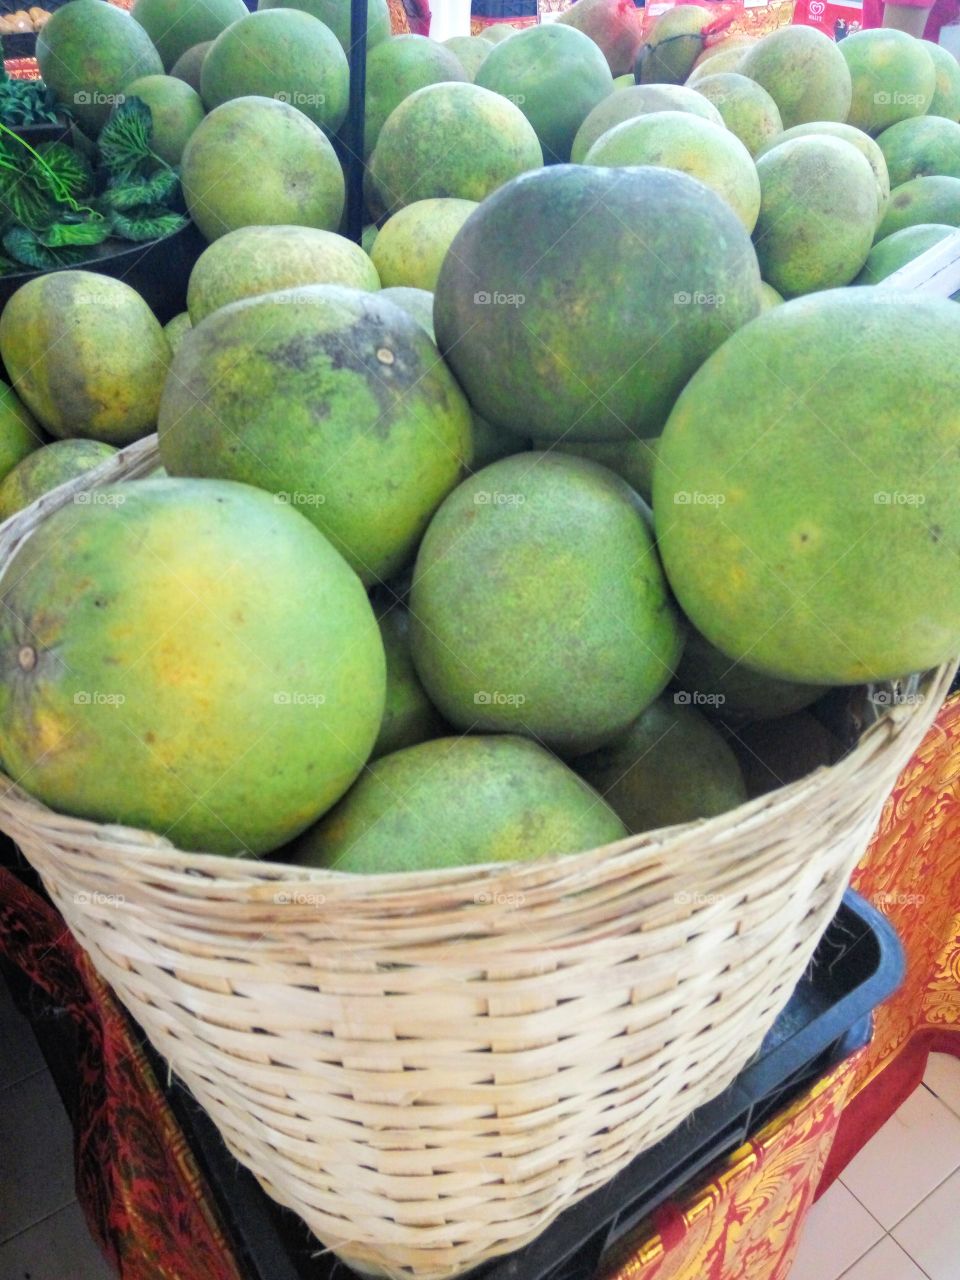 Pomelo (balinese orange) is kind of orange fruit that has a big size than another oranges.